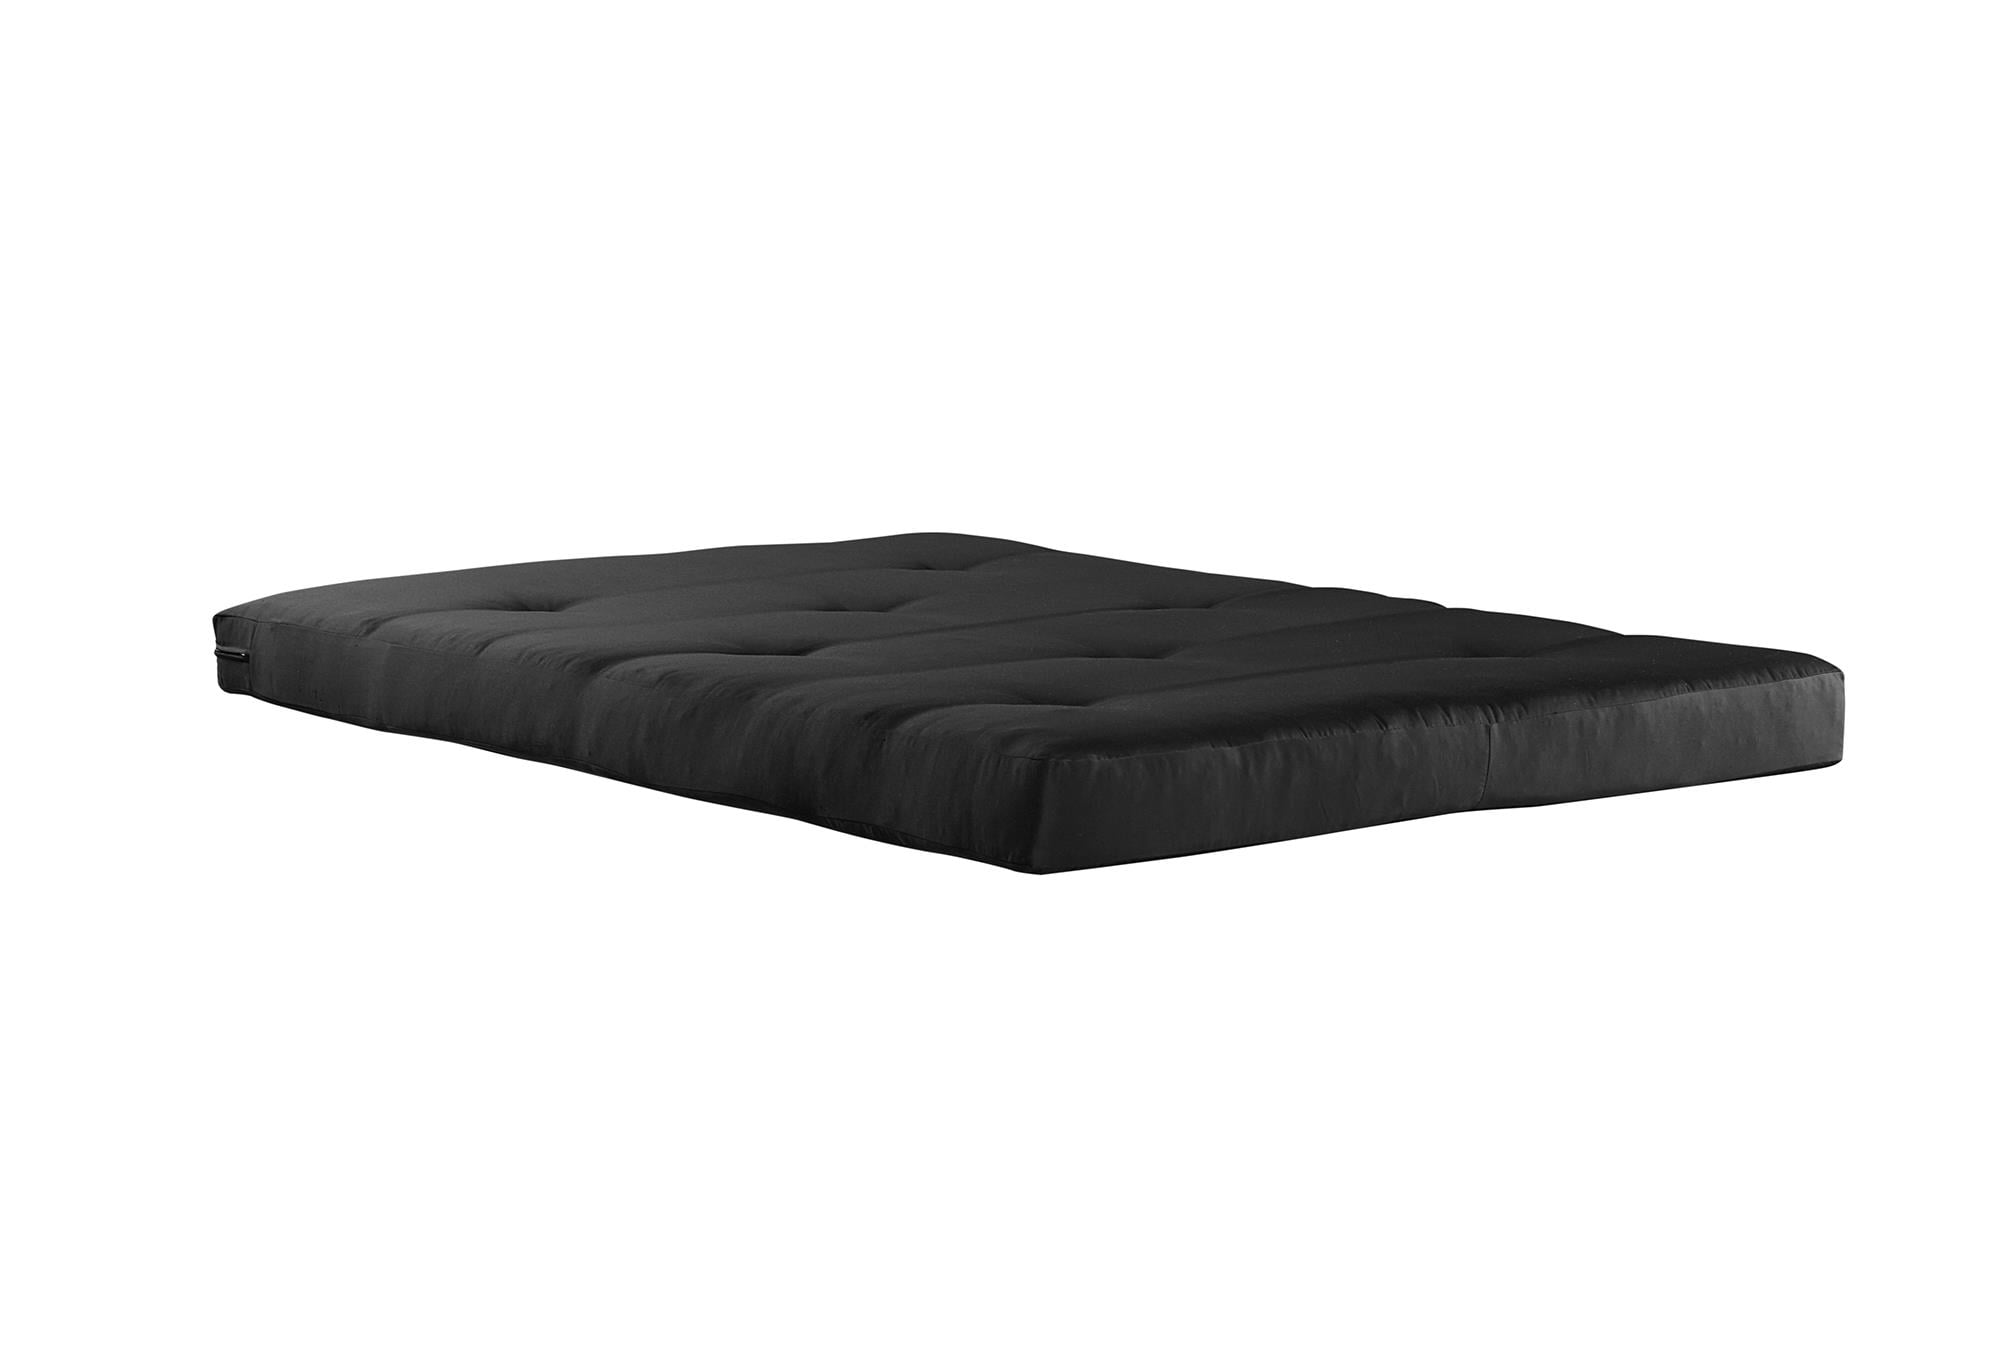 Details about   Futon Mattress Full Size Couch Sofa Bed Guest Mattress Black 6 Inch